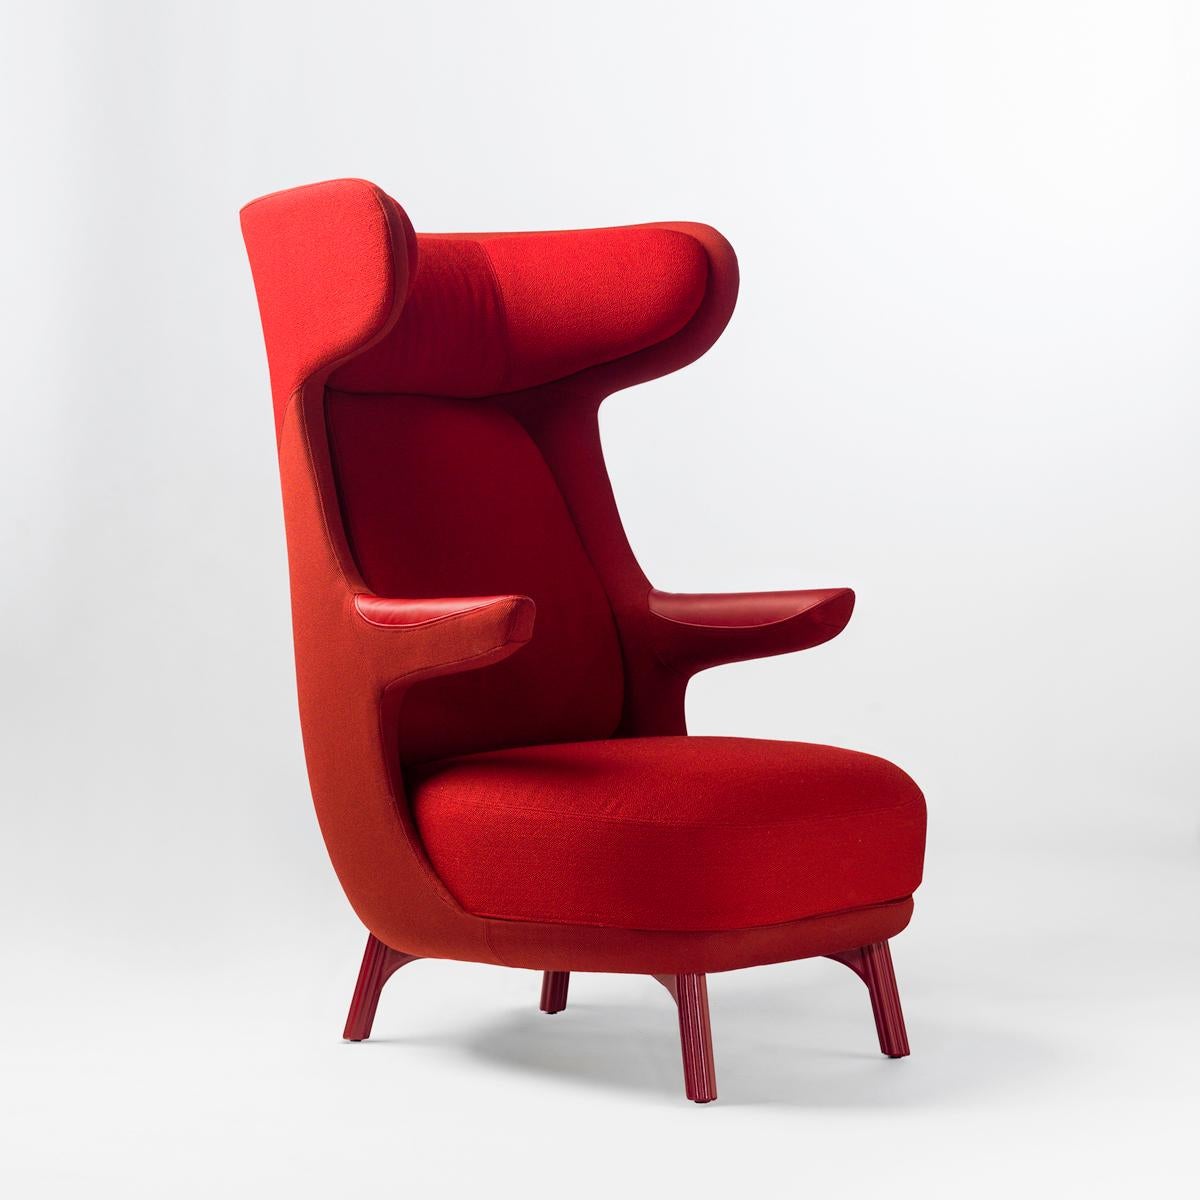 Spanish Jaime Hayon, Contemporary Monocolour Red Fabric Leather Upholstery Dino Armchair